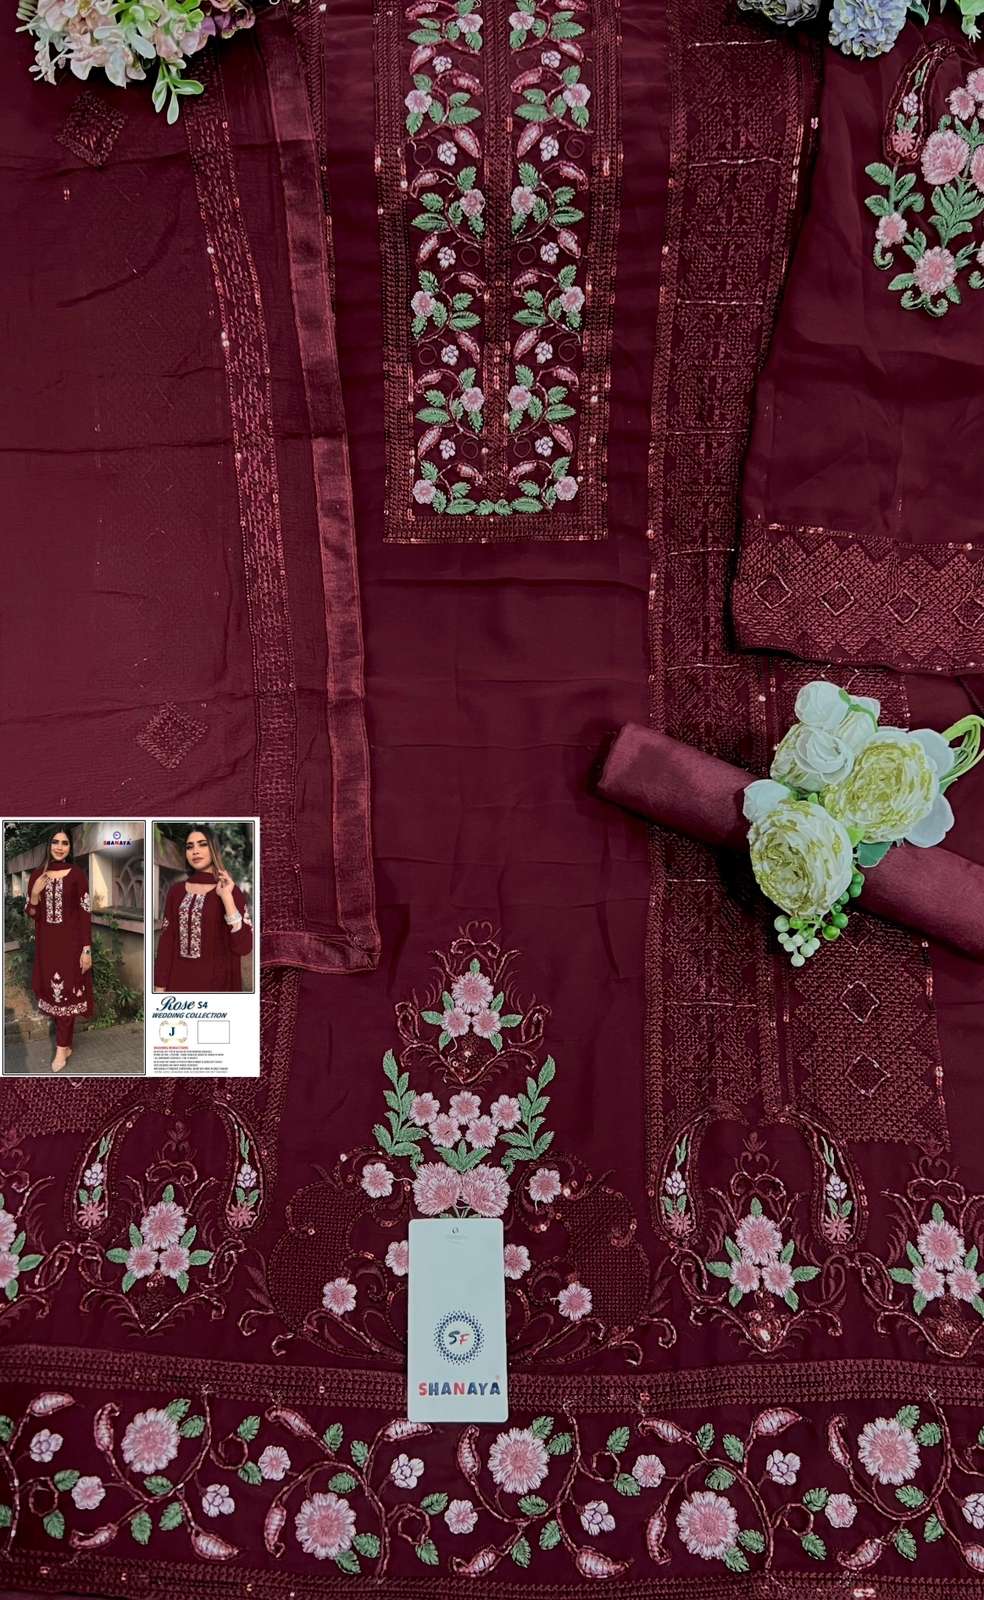 Rose S-4 Wedding Collection Vol-3 By Shanaya Fashion J To L Series Pakistani Suits Beautiful Fancy Colorful Stylish Party Wear & Occasional Wear Faux Georgette With Embroidery Dresses At Wholesale Price